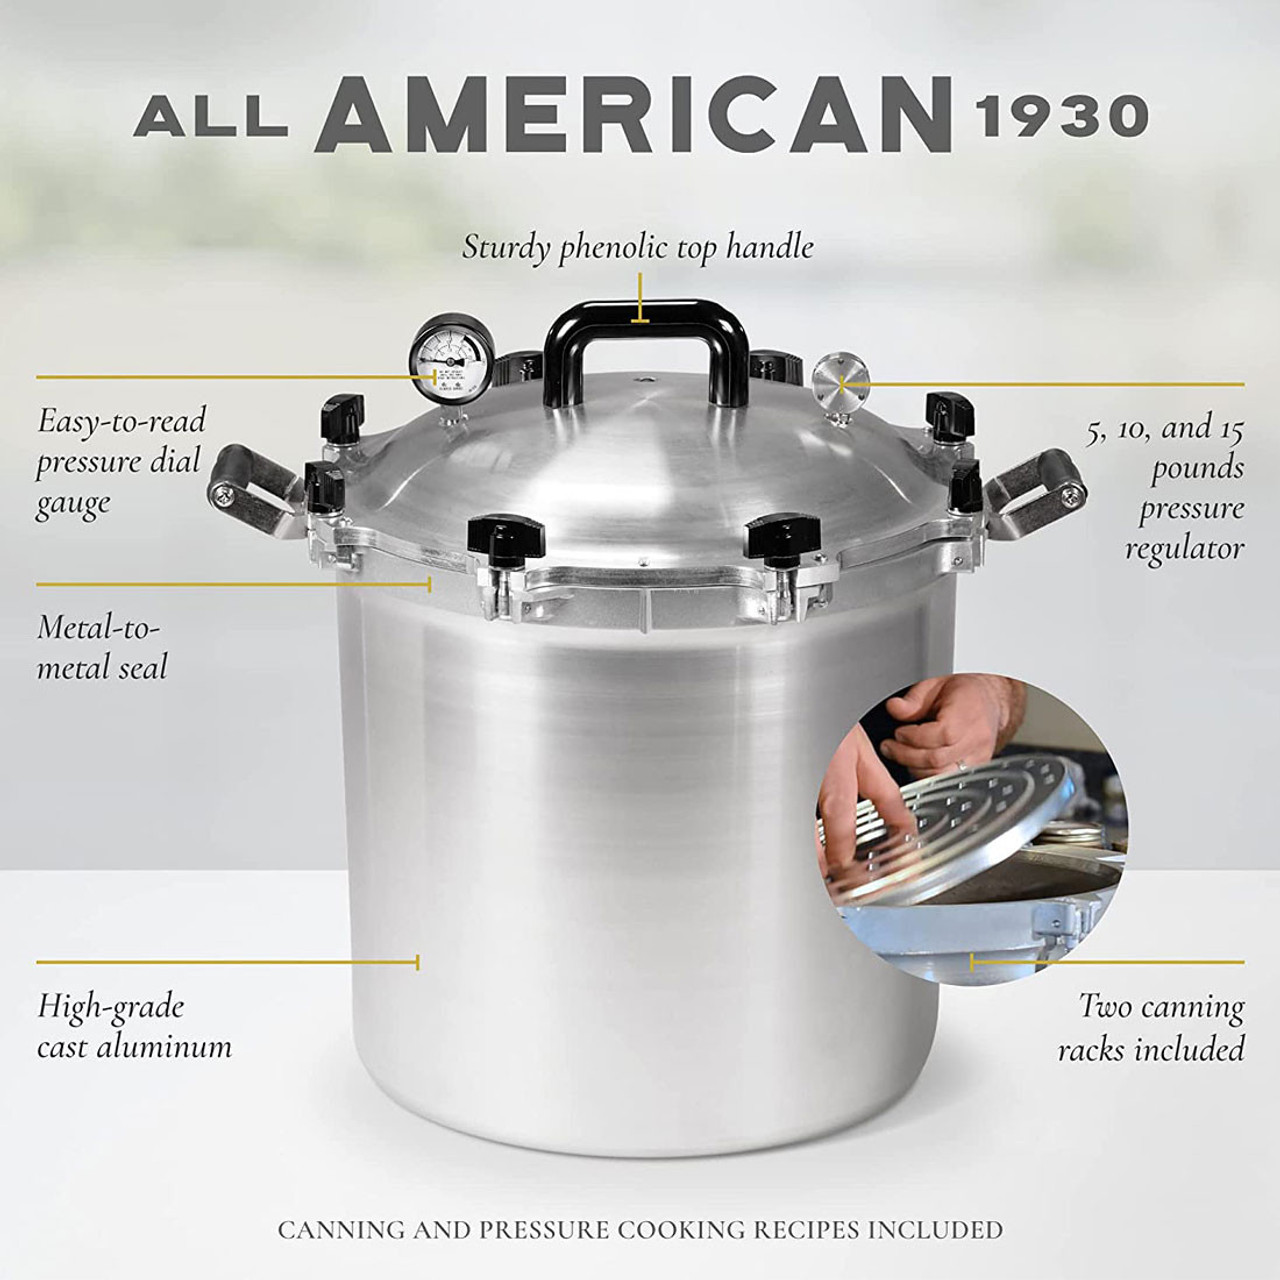 https://cdn11.bigcommerce.com/s-j602wc6a/images/stencil/1280x1280/products/7004/31502/All-American-Cookers-Canners-Infographic__95309.1670457375.jpg?c=2